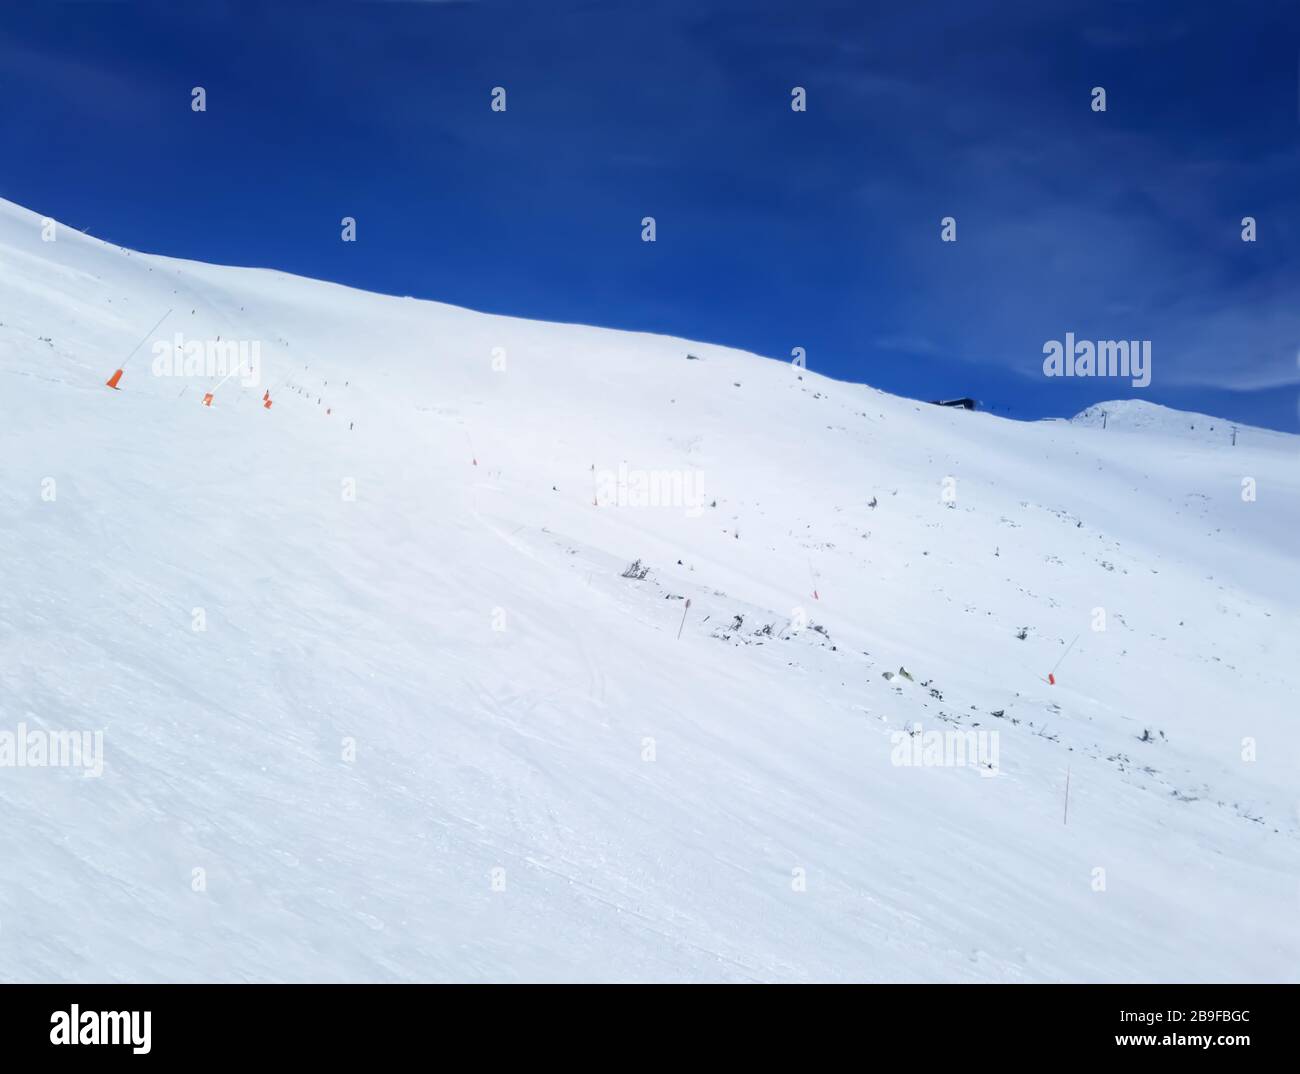 Jasna, Slovakia - January 22, 2019: Blue sky, cableway, skiers and panoramic view on the mountain slope in Low Tatras on a winter sunny day on the Jas Stock Photo